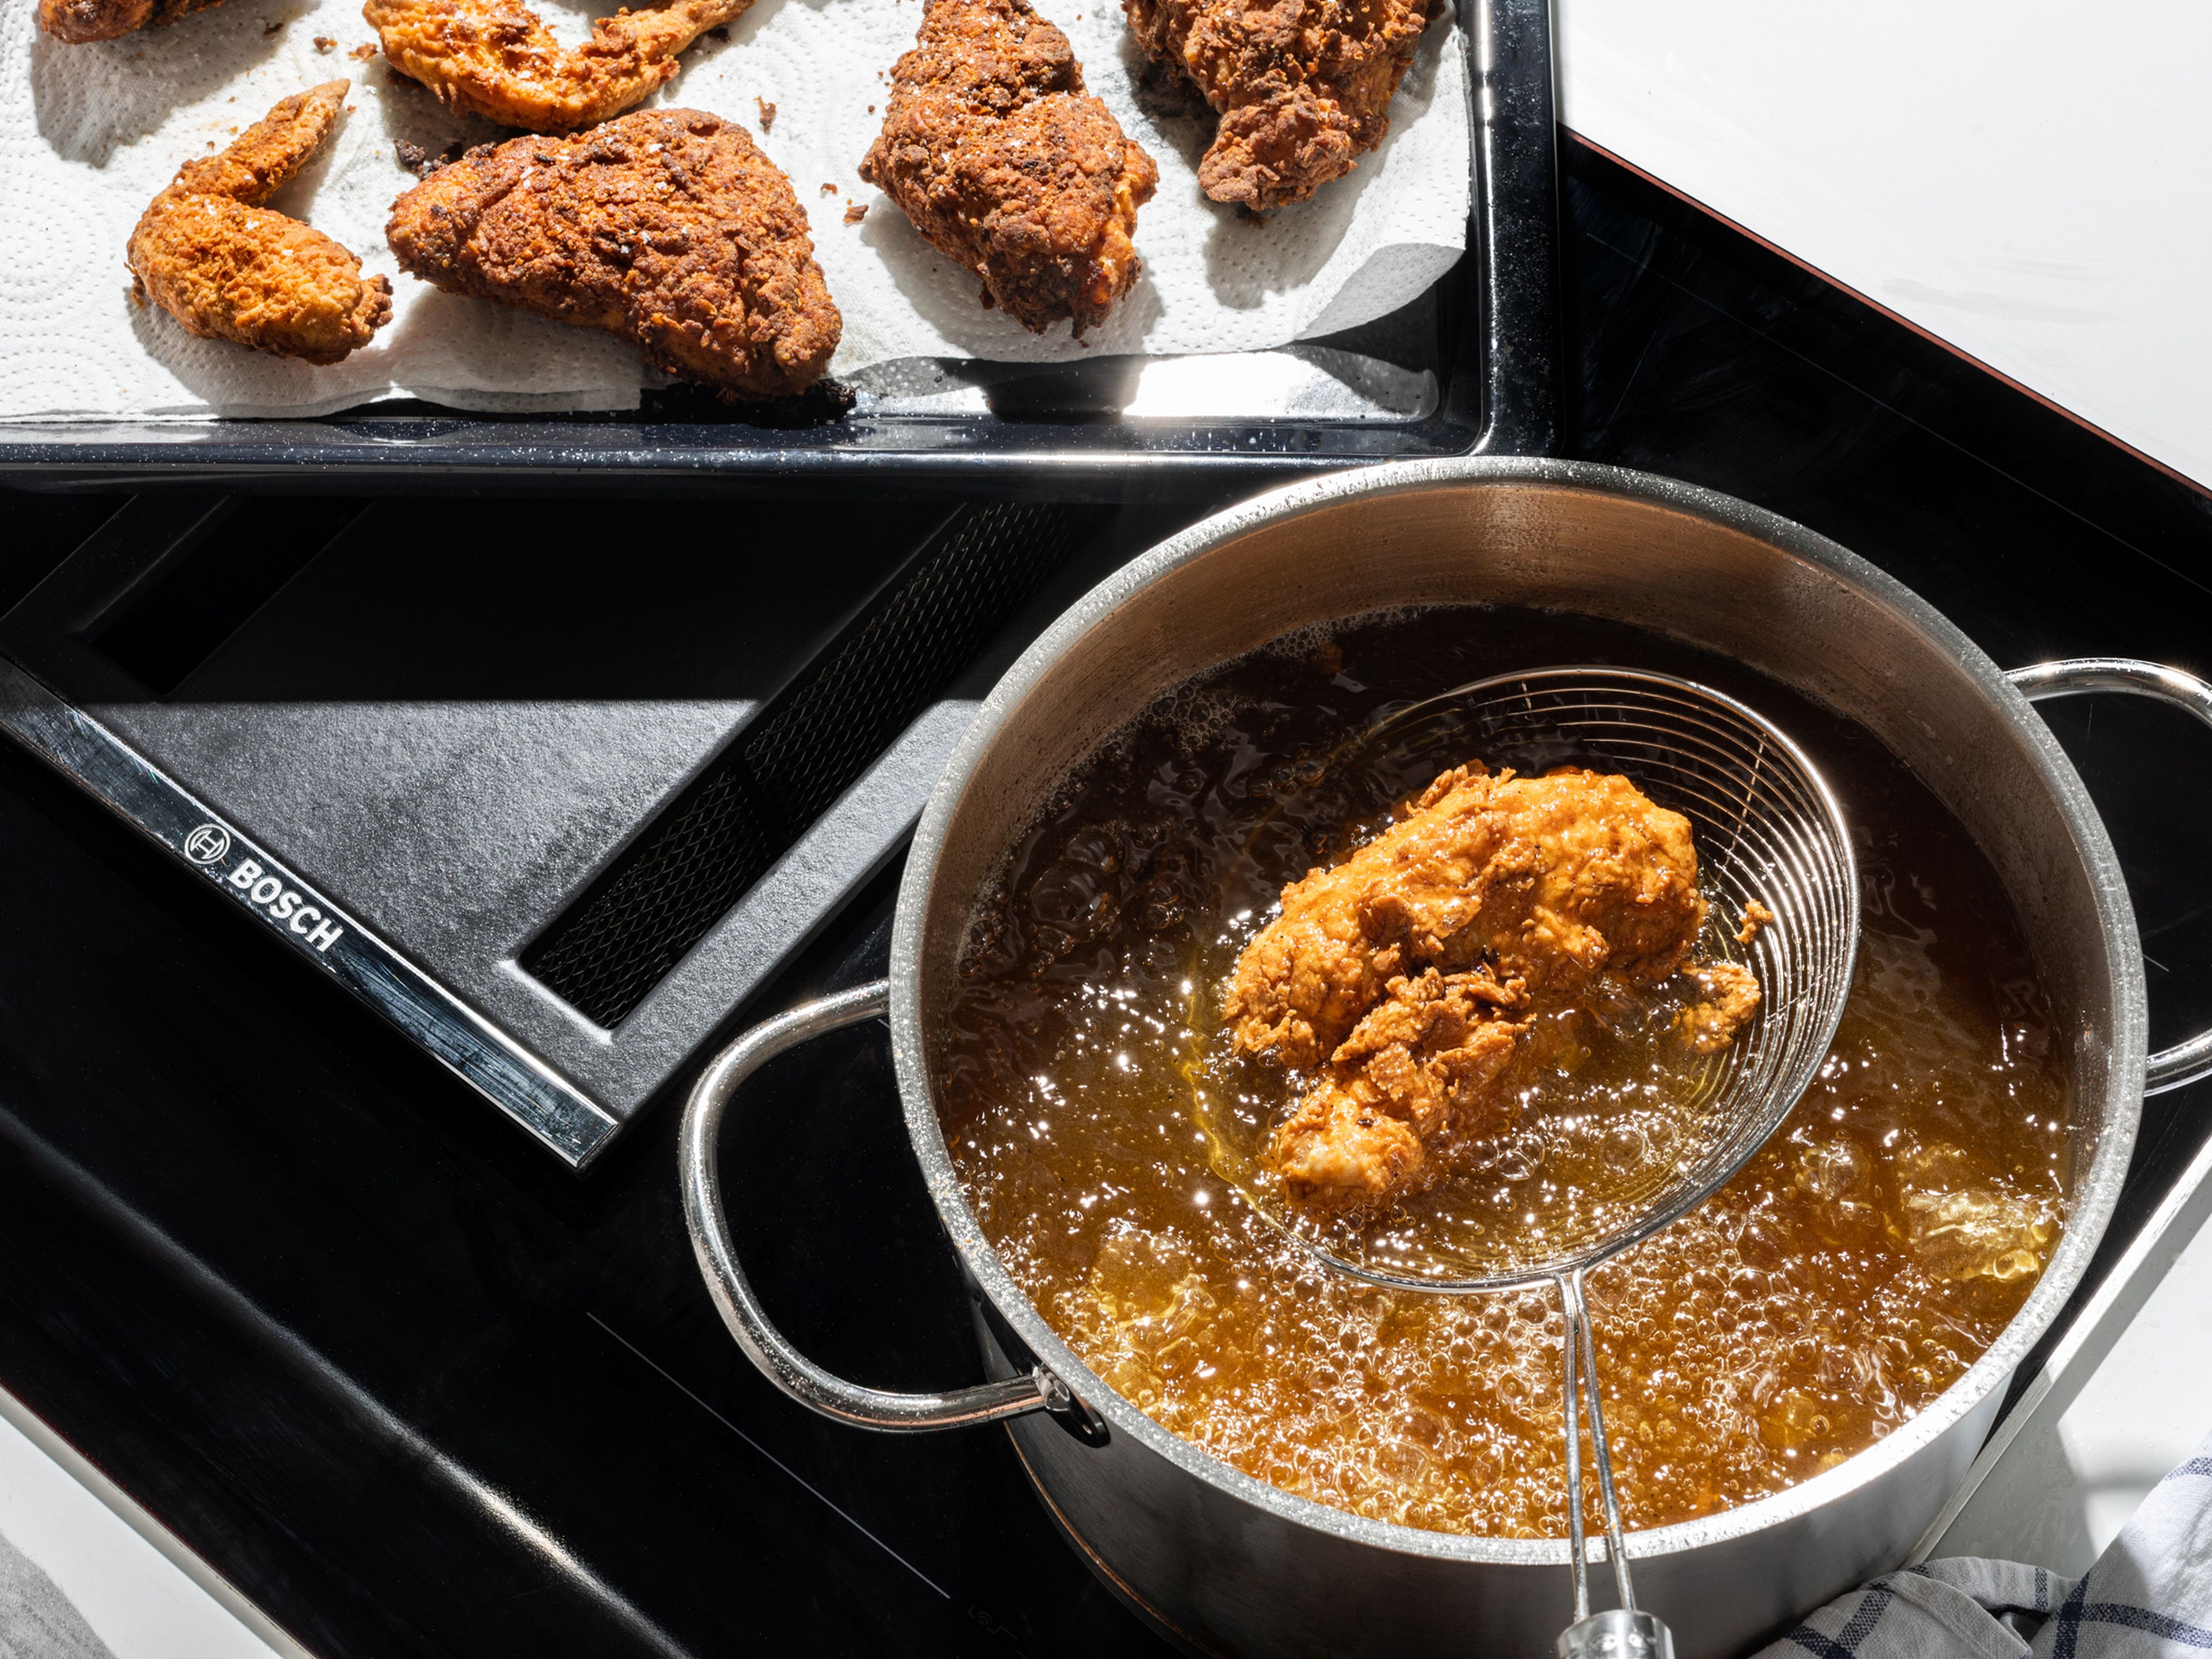 For the deep-fried method, heat up oil in a large stainless steel pot, over medium-high heat, until it reads 175°C/345°F on a thermometer. Safely lower approx. 3 pieces of chicken into the oil, one at a time, using tongs. Cook for approx. 10 – 14 min, until golden brown and cooked through. Gently stir the oil a couple of times during the cooking process to rotate the chicken. White meat like chicken breast takes less time to cook, and should register at least 71°C/160°F internally. Dark meat like thighs or any meat on the bone should register 74°C/165°F. To test, lift a piece of chicken out of the oil using a slotted spoon or tongs and pierce with the meat thermometer. Remove the chicken from the pot and let drain on a wire rack. Continue with all remaining chicken.